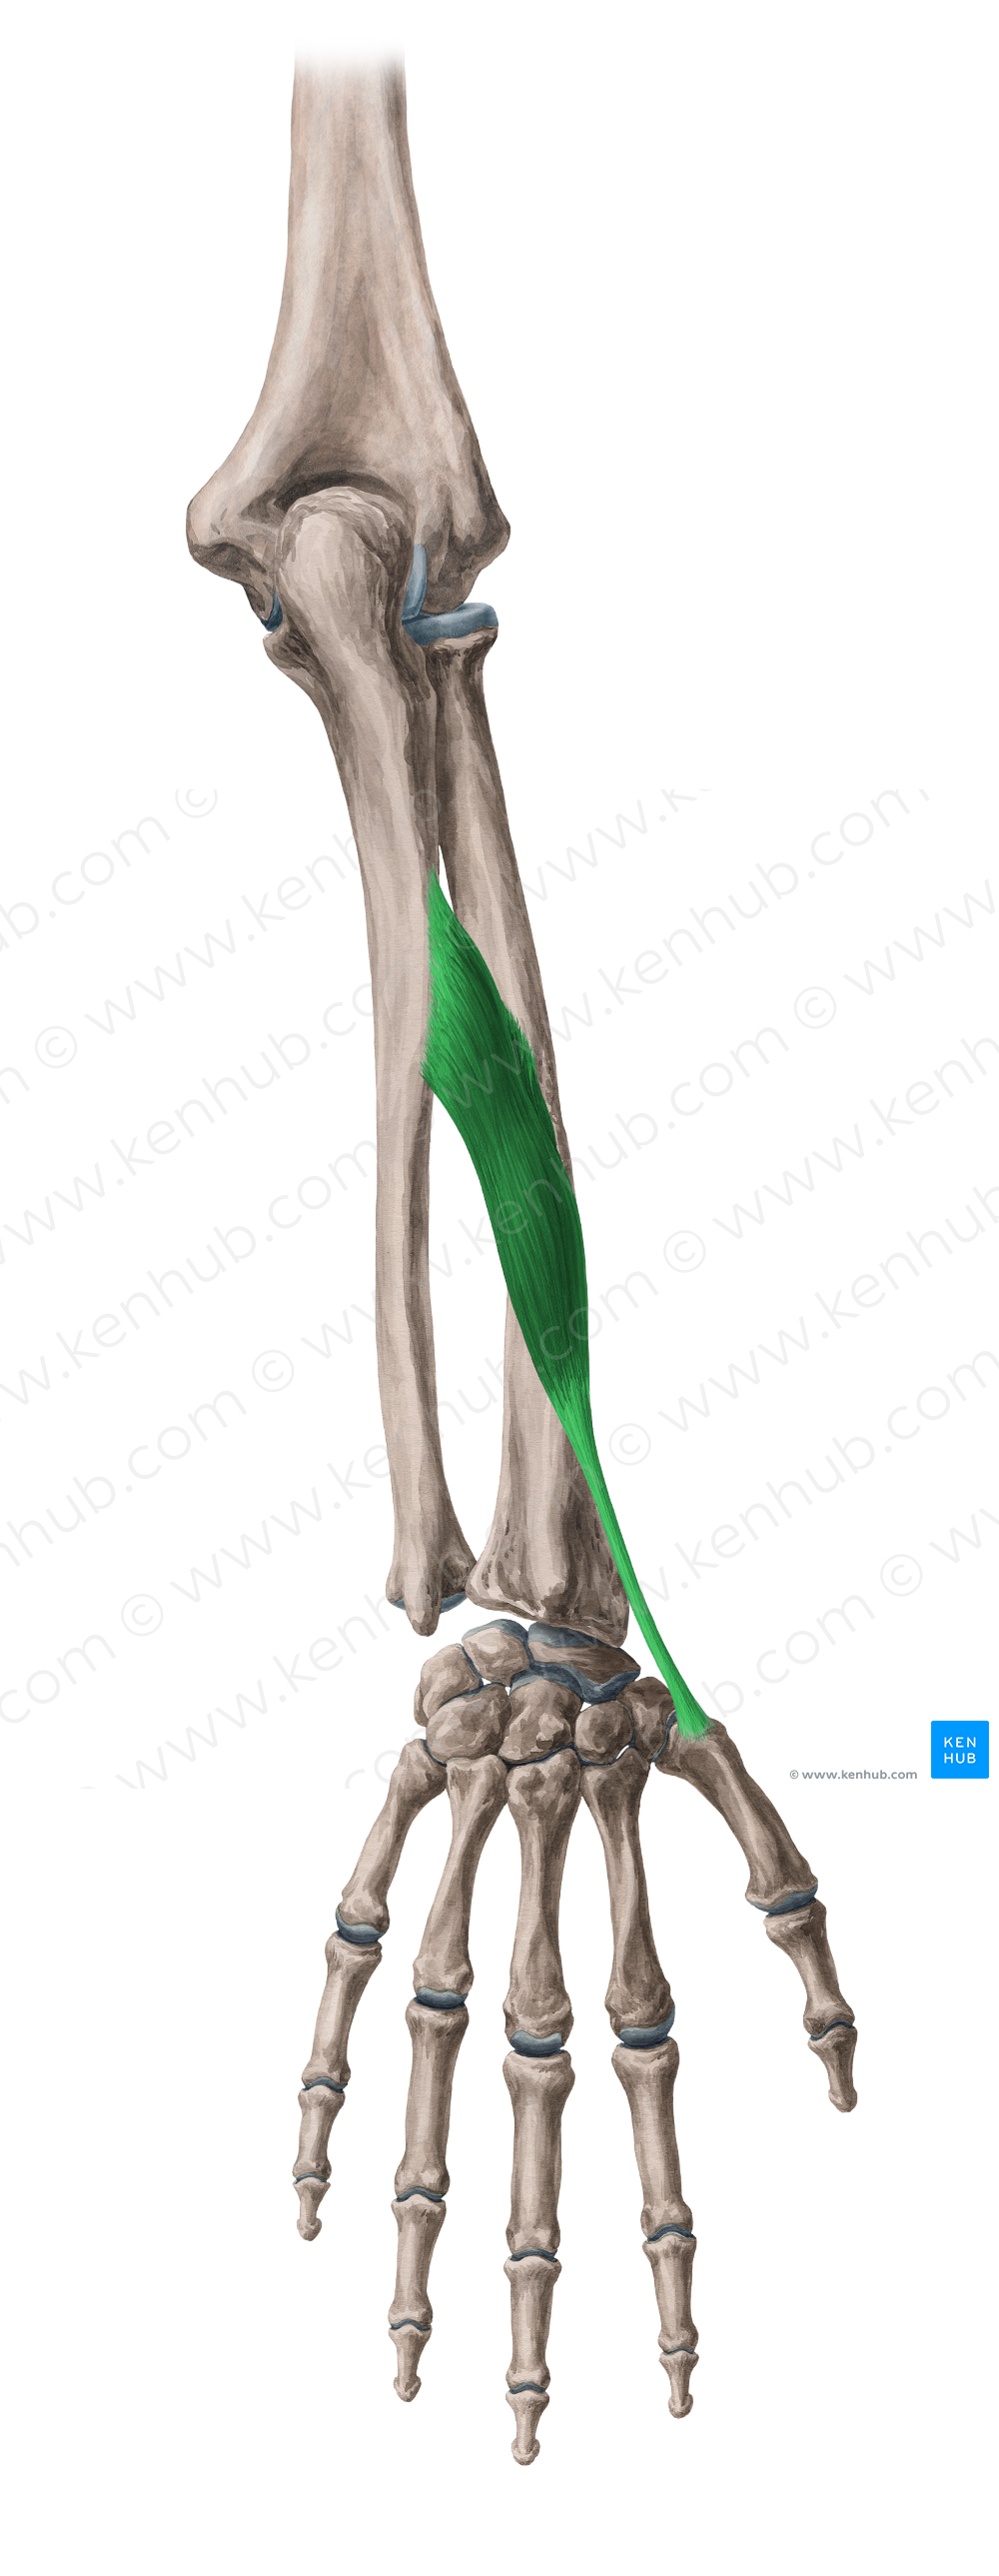 Abductor pollicis longus muscle (#5175)